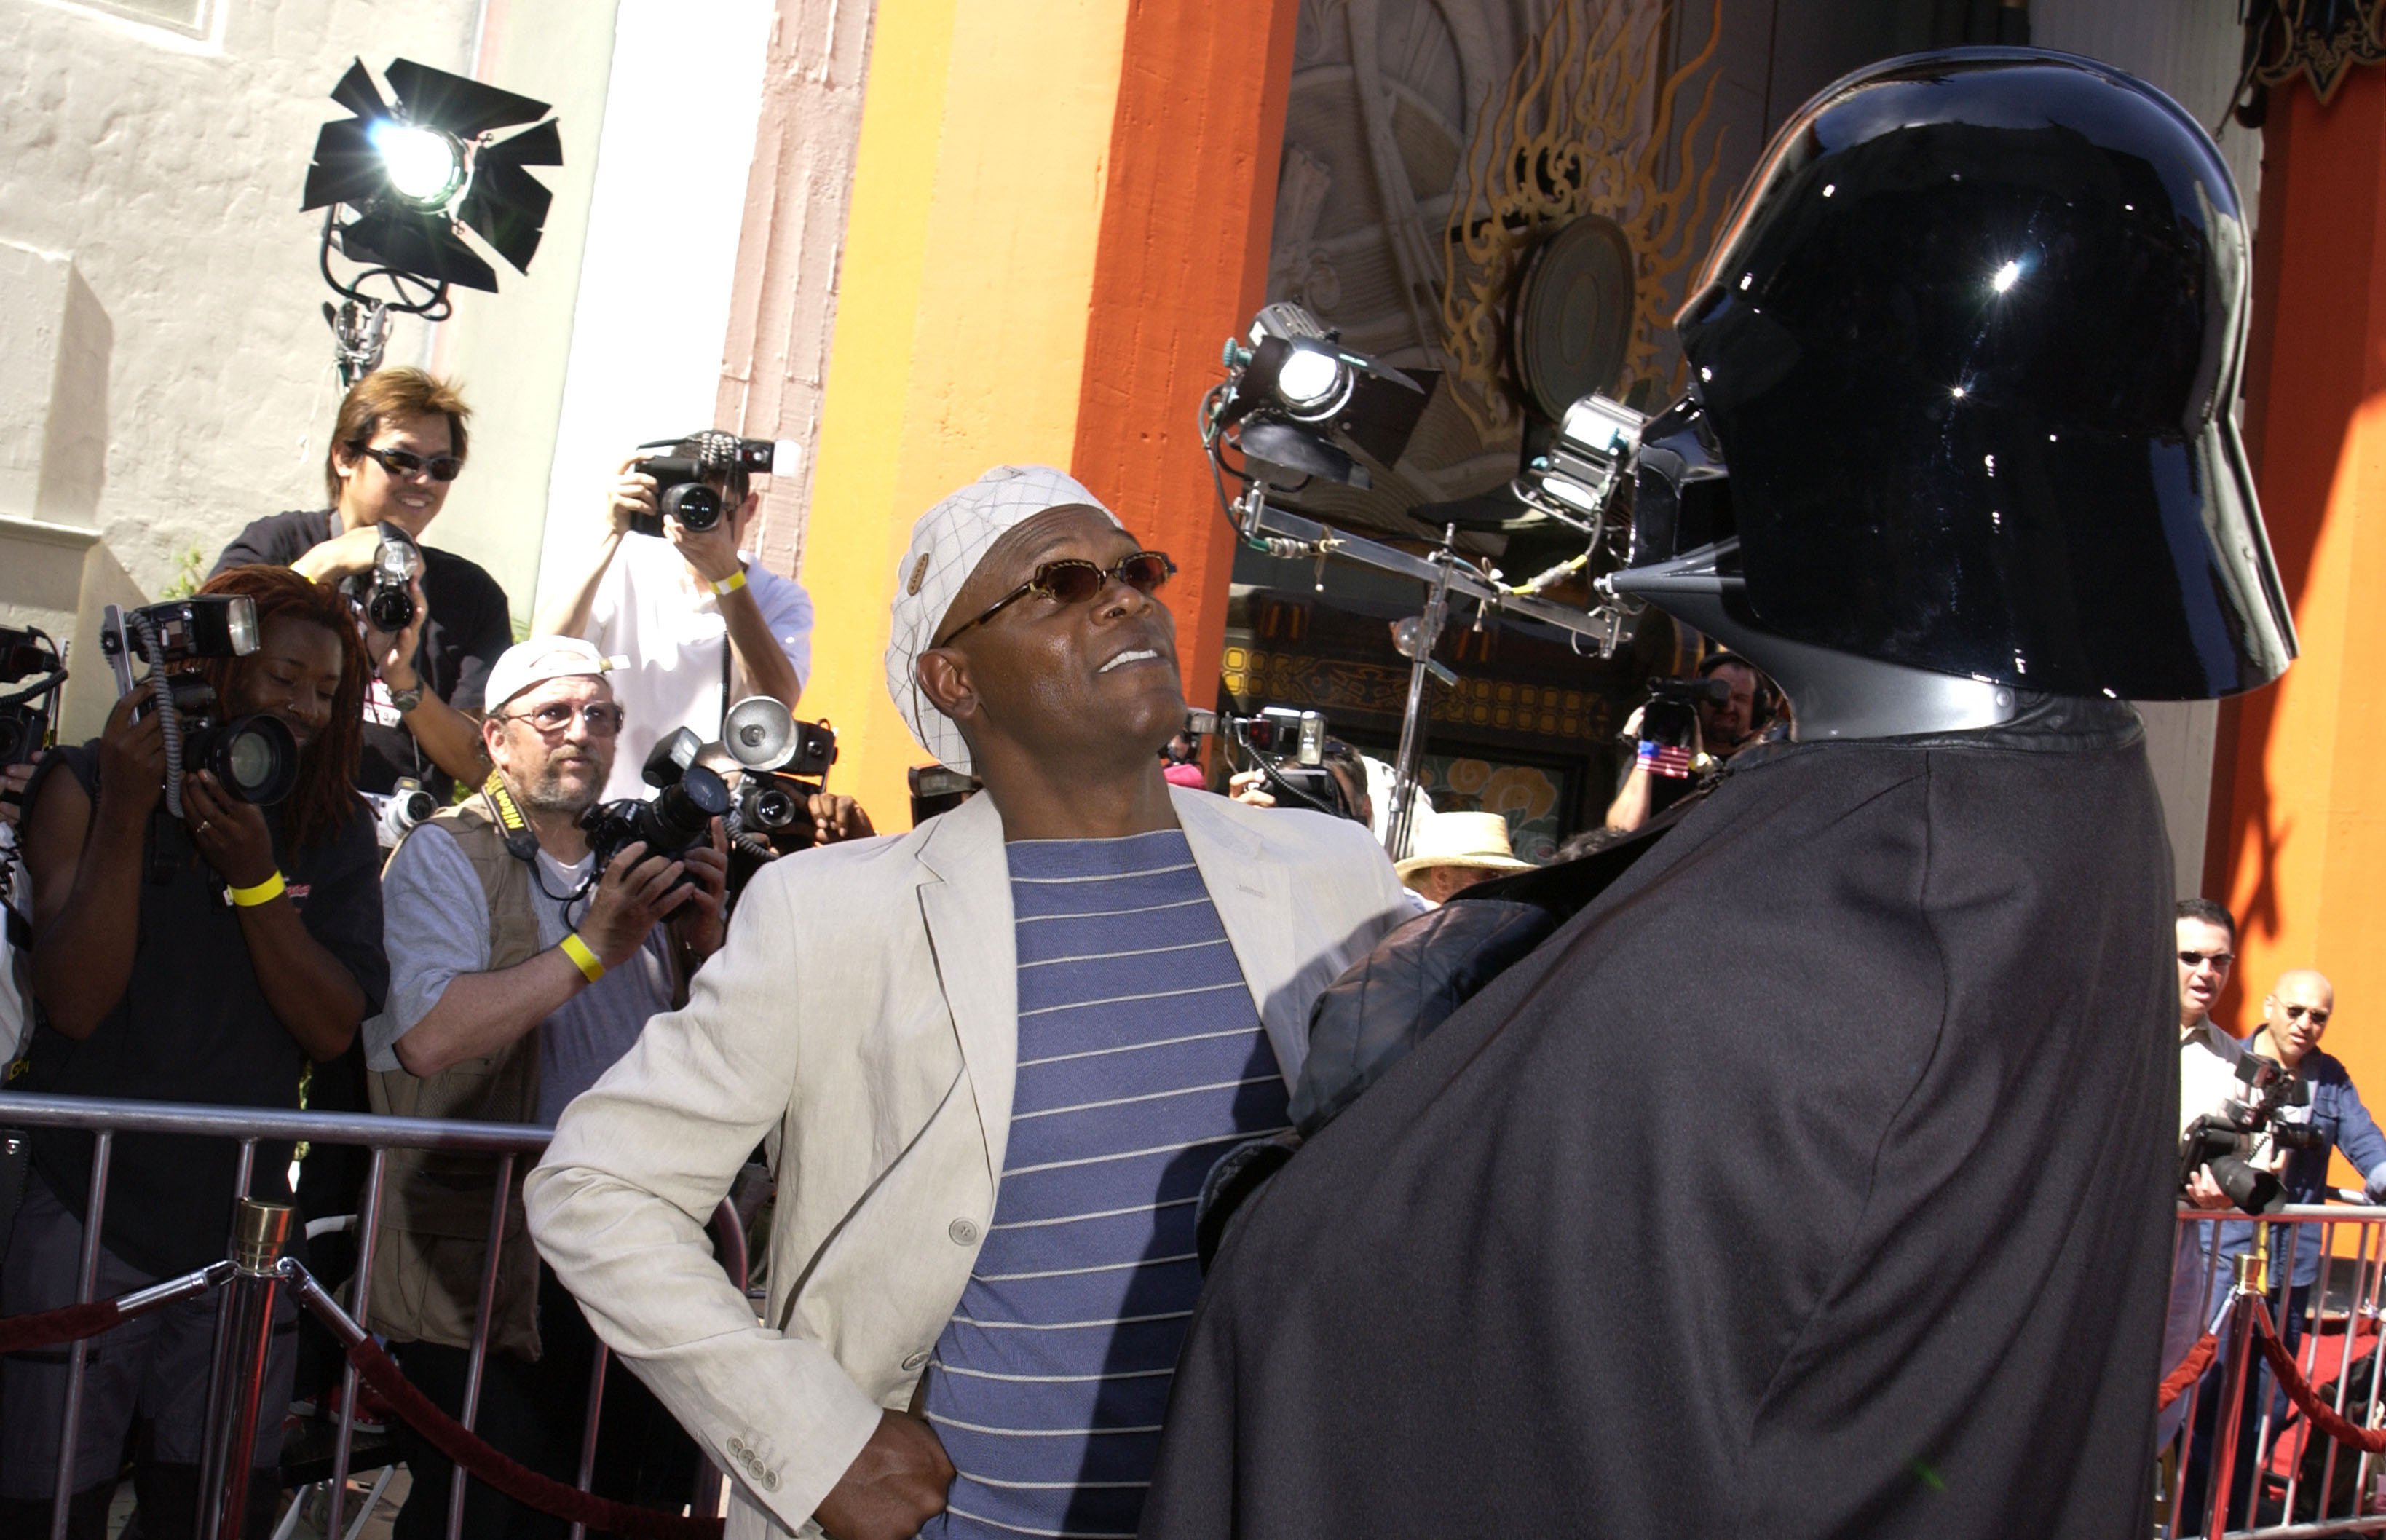 Samuel L. Jackson attends the Los Angeles premiere of Star Wars: Episode II - Attack of the Clones